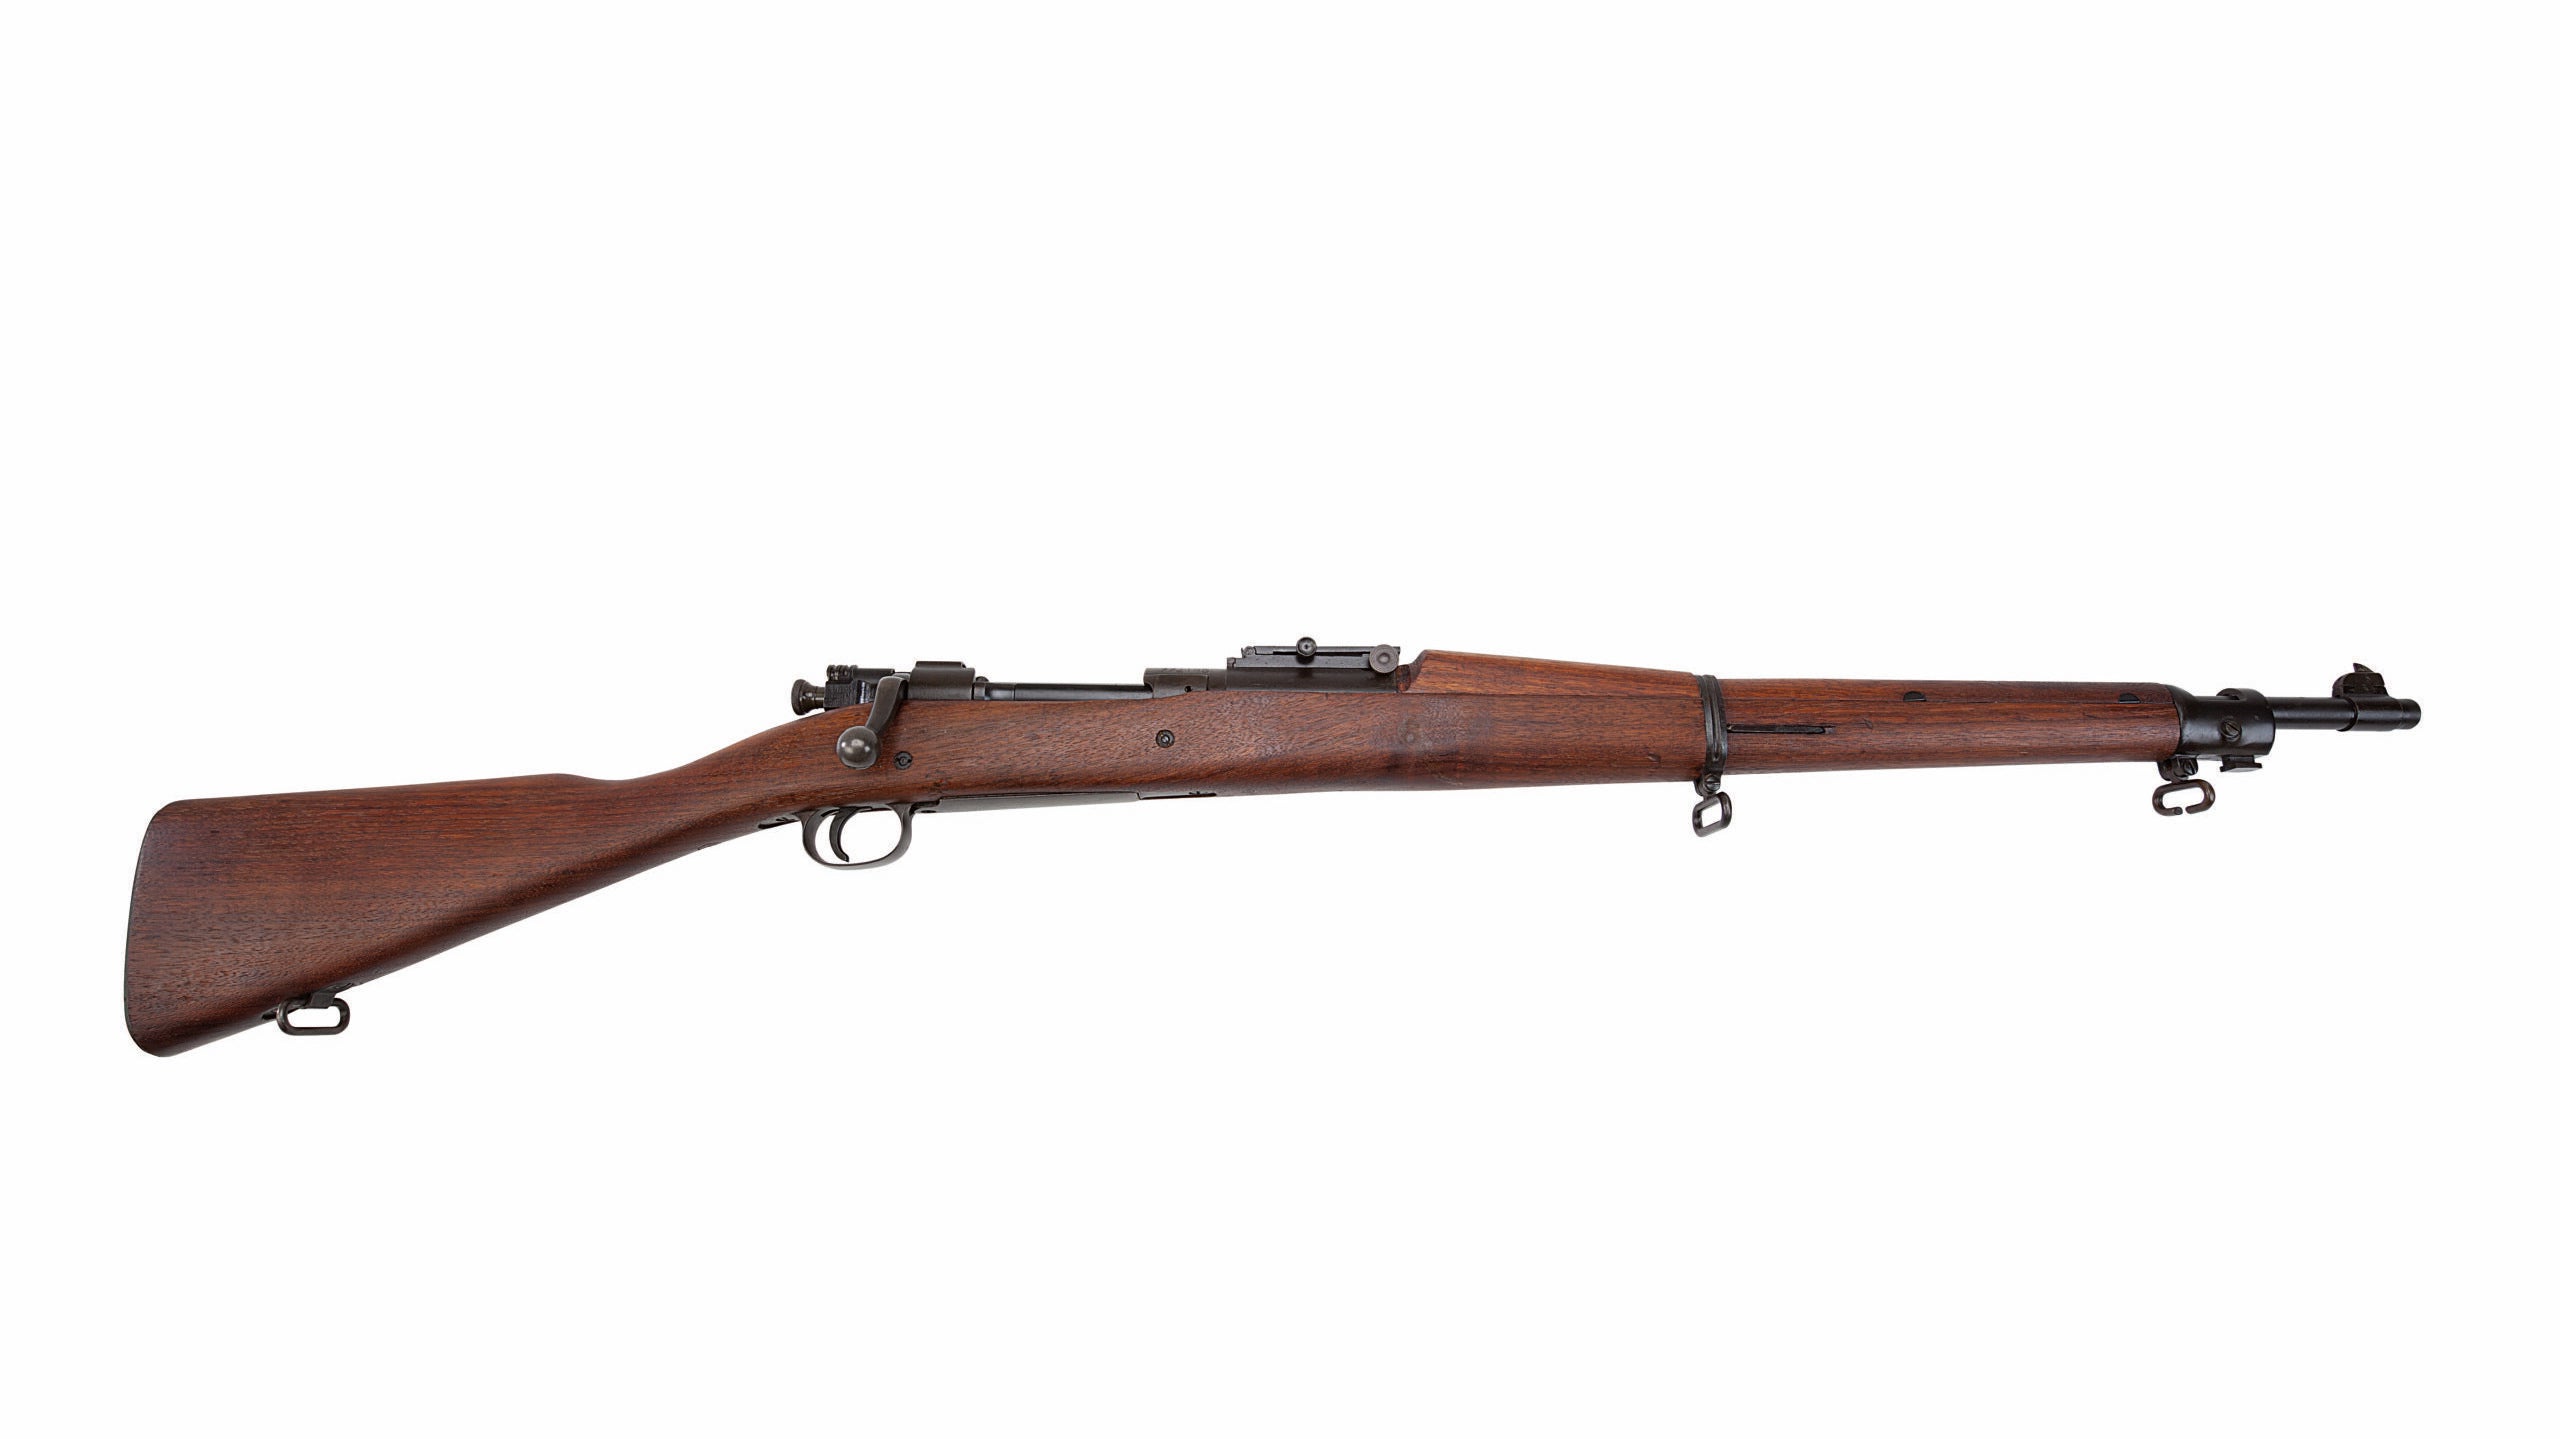 The Model 1903 Springfield rifle on a white background.